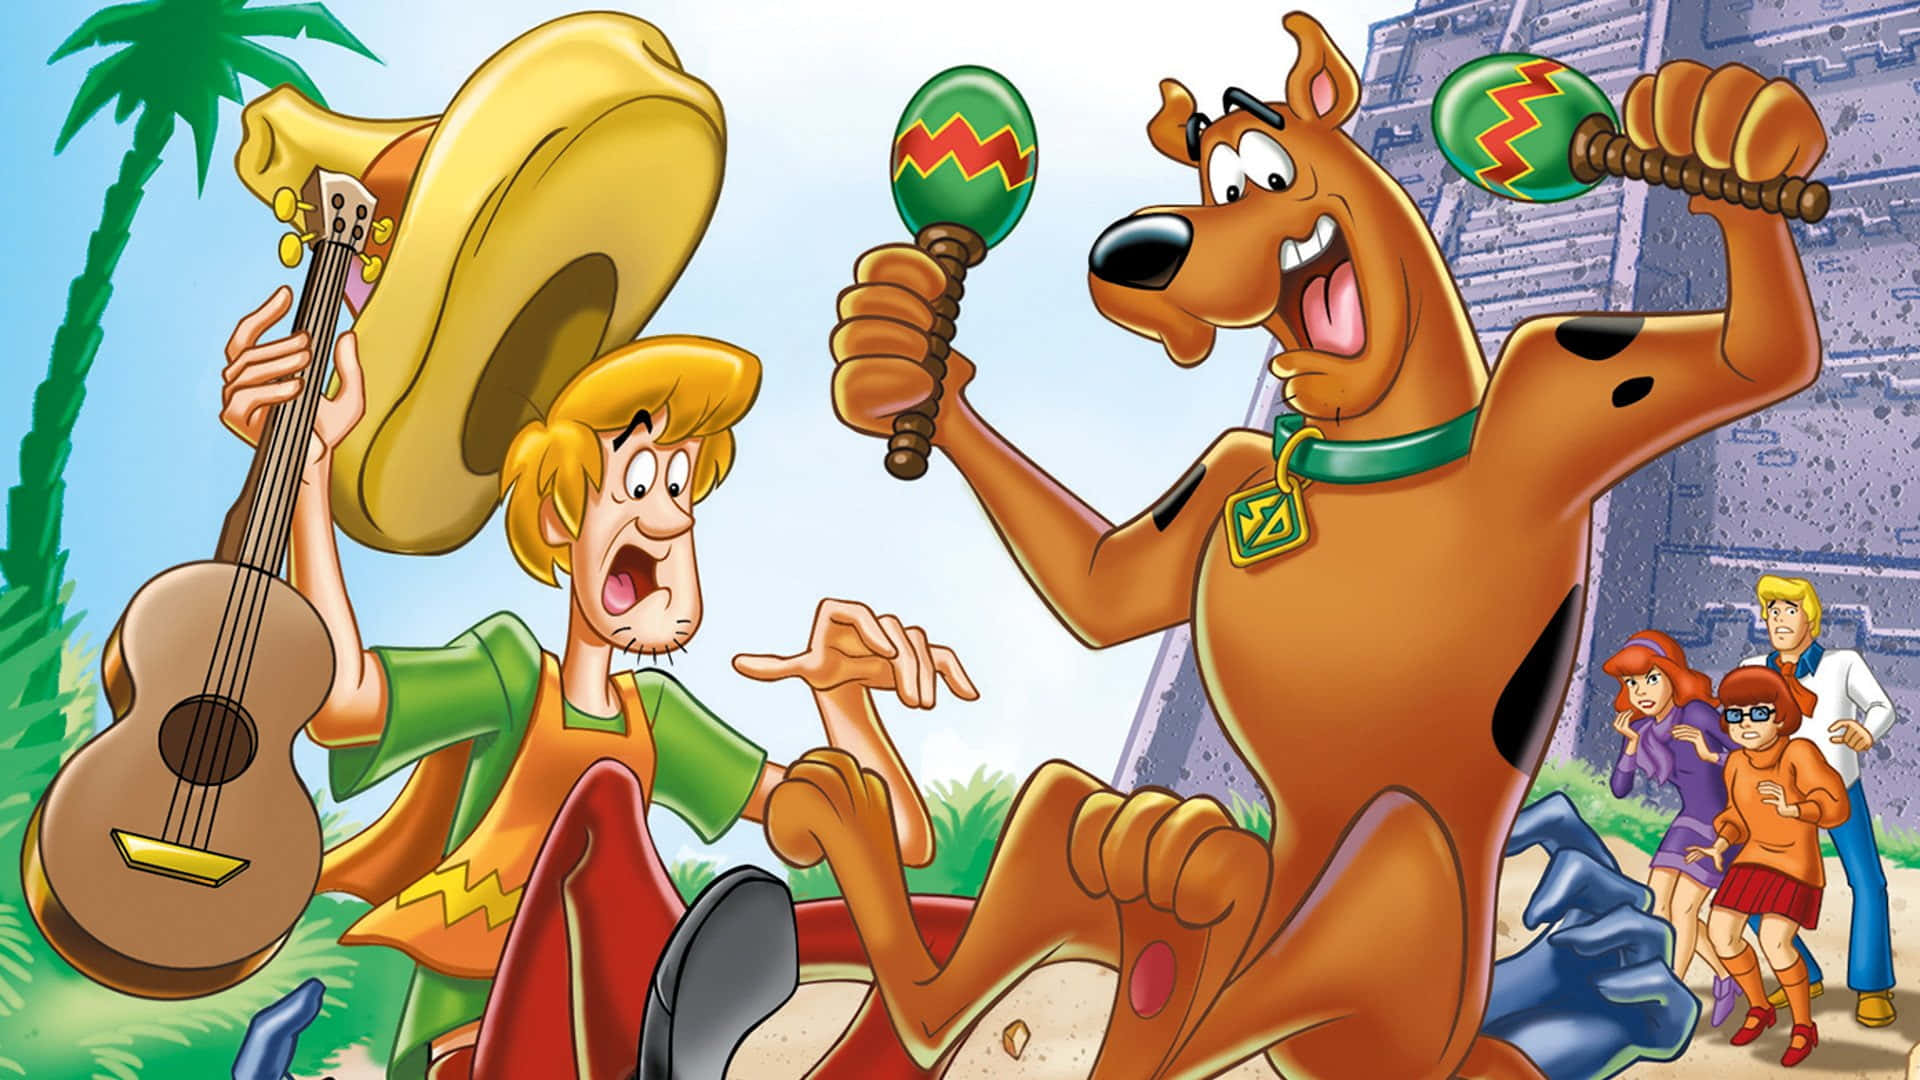 Follow the Mystery Inc Gang and Solve the Mystery with Scooby-Doo